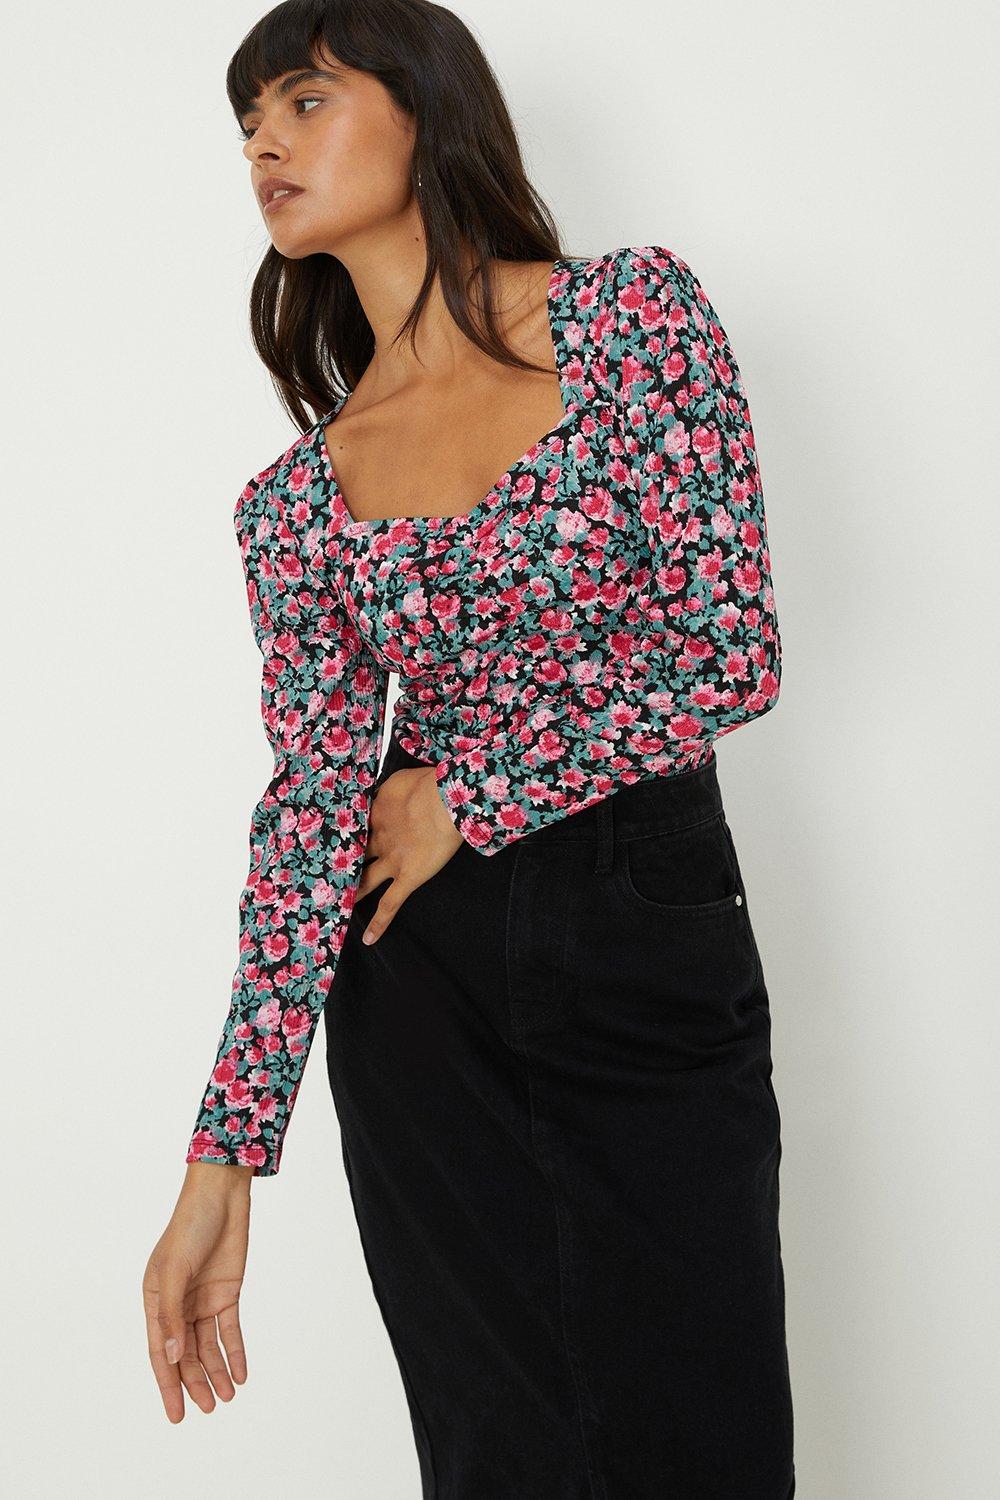 Missguided wrap bodysuit with frill cuff in black floral